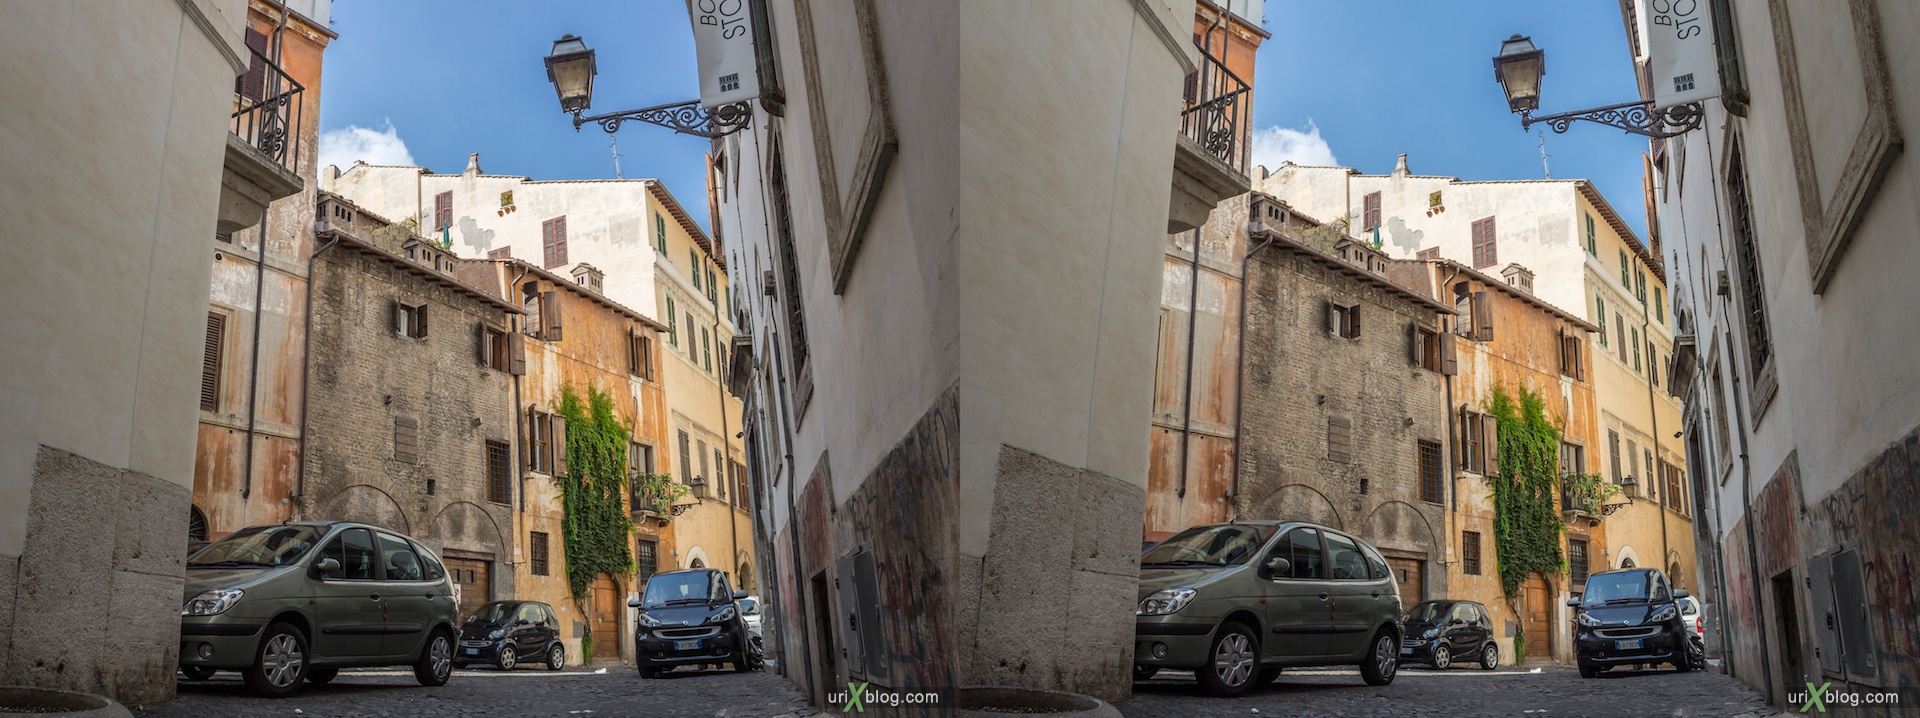 2012, vicolo degli Osti street, alley, 3D, stereo pair, cross-eyed, crossview, cross view stereo pair